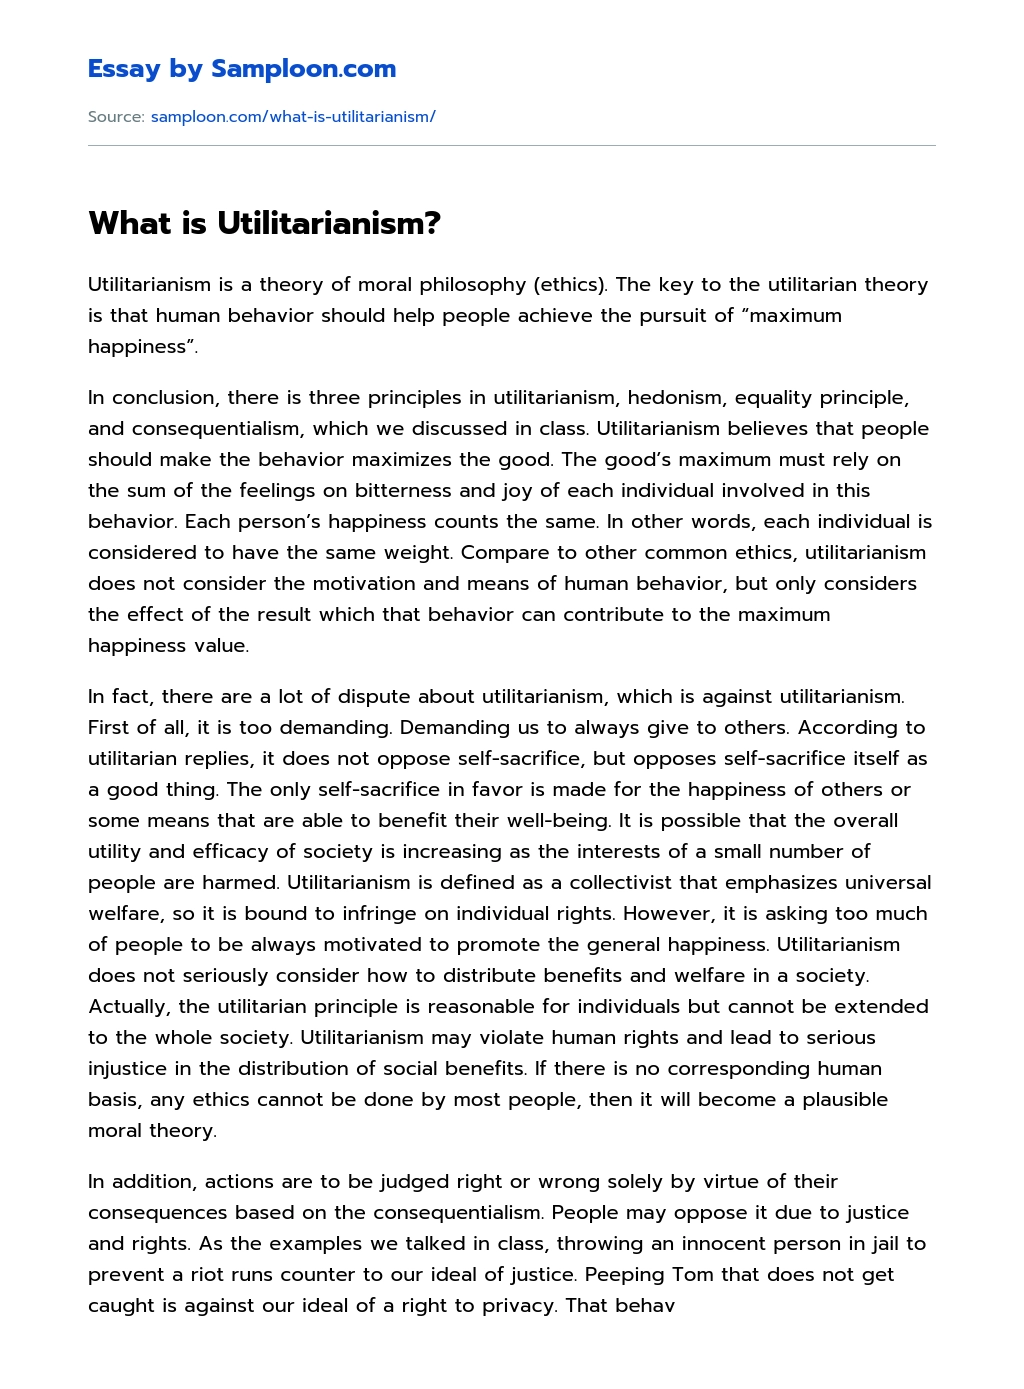 What is Utilitarianism? essay